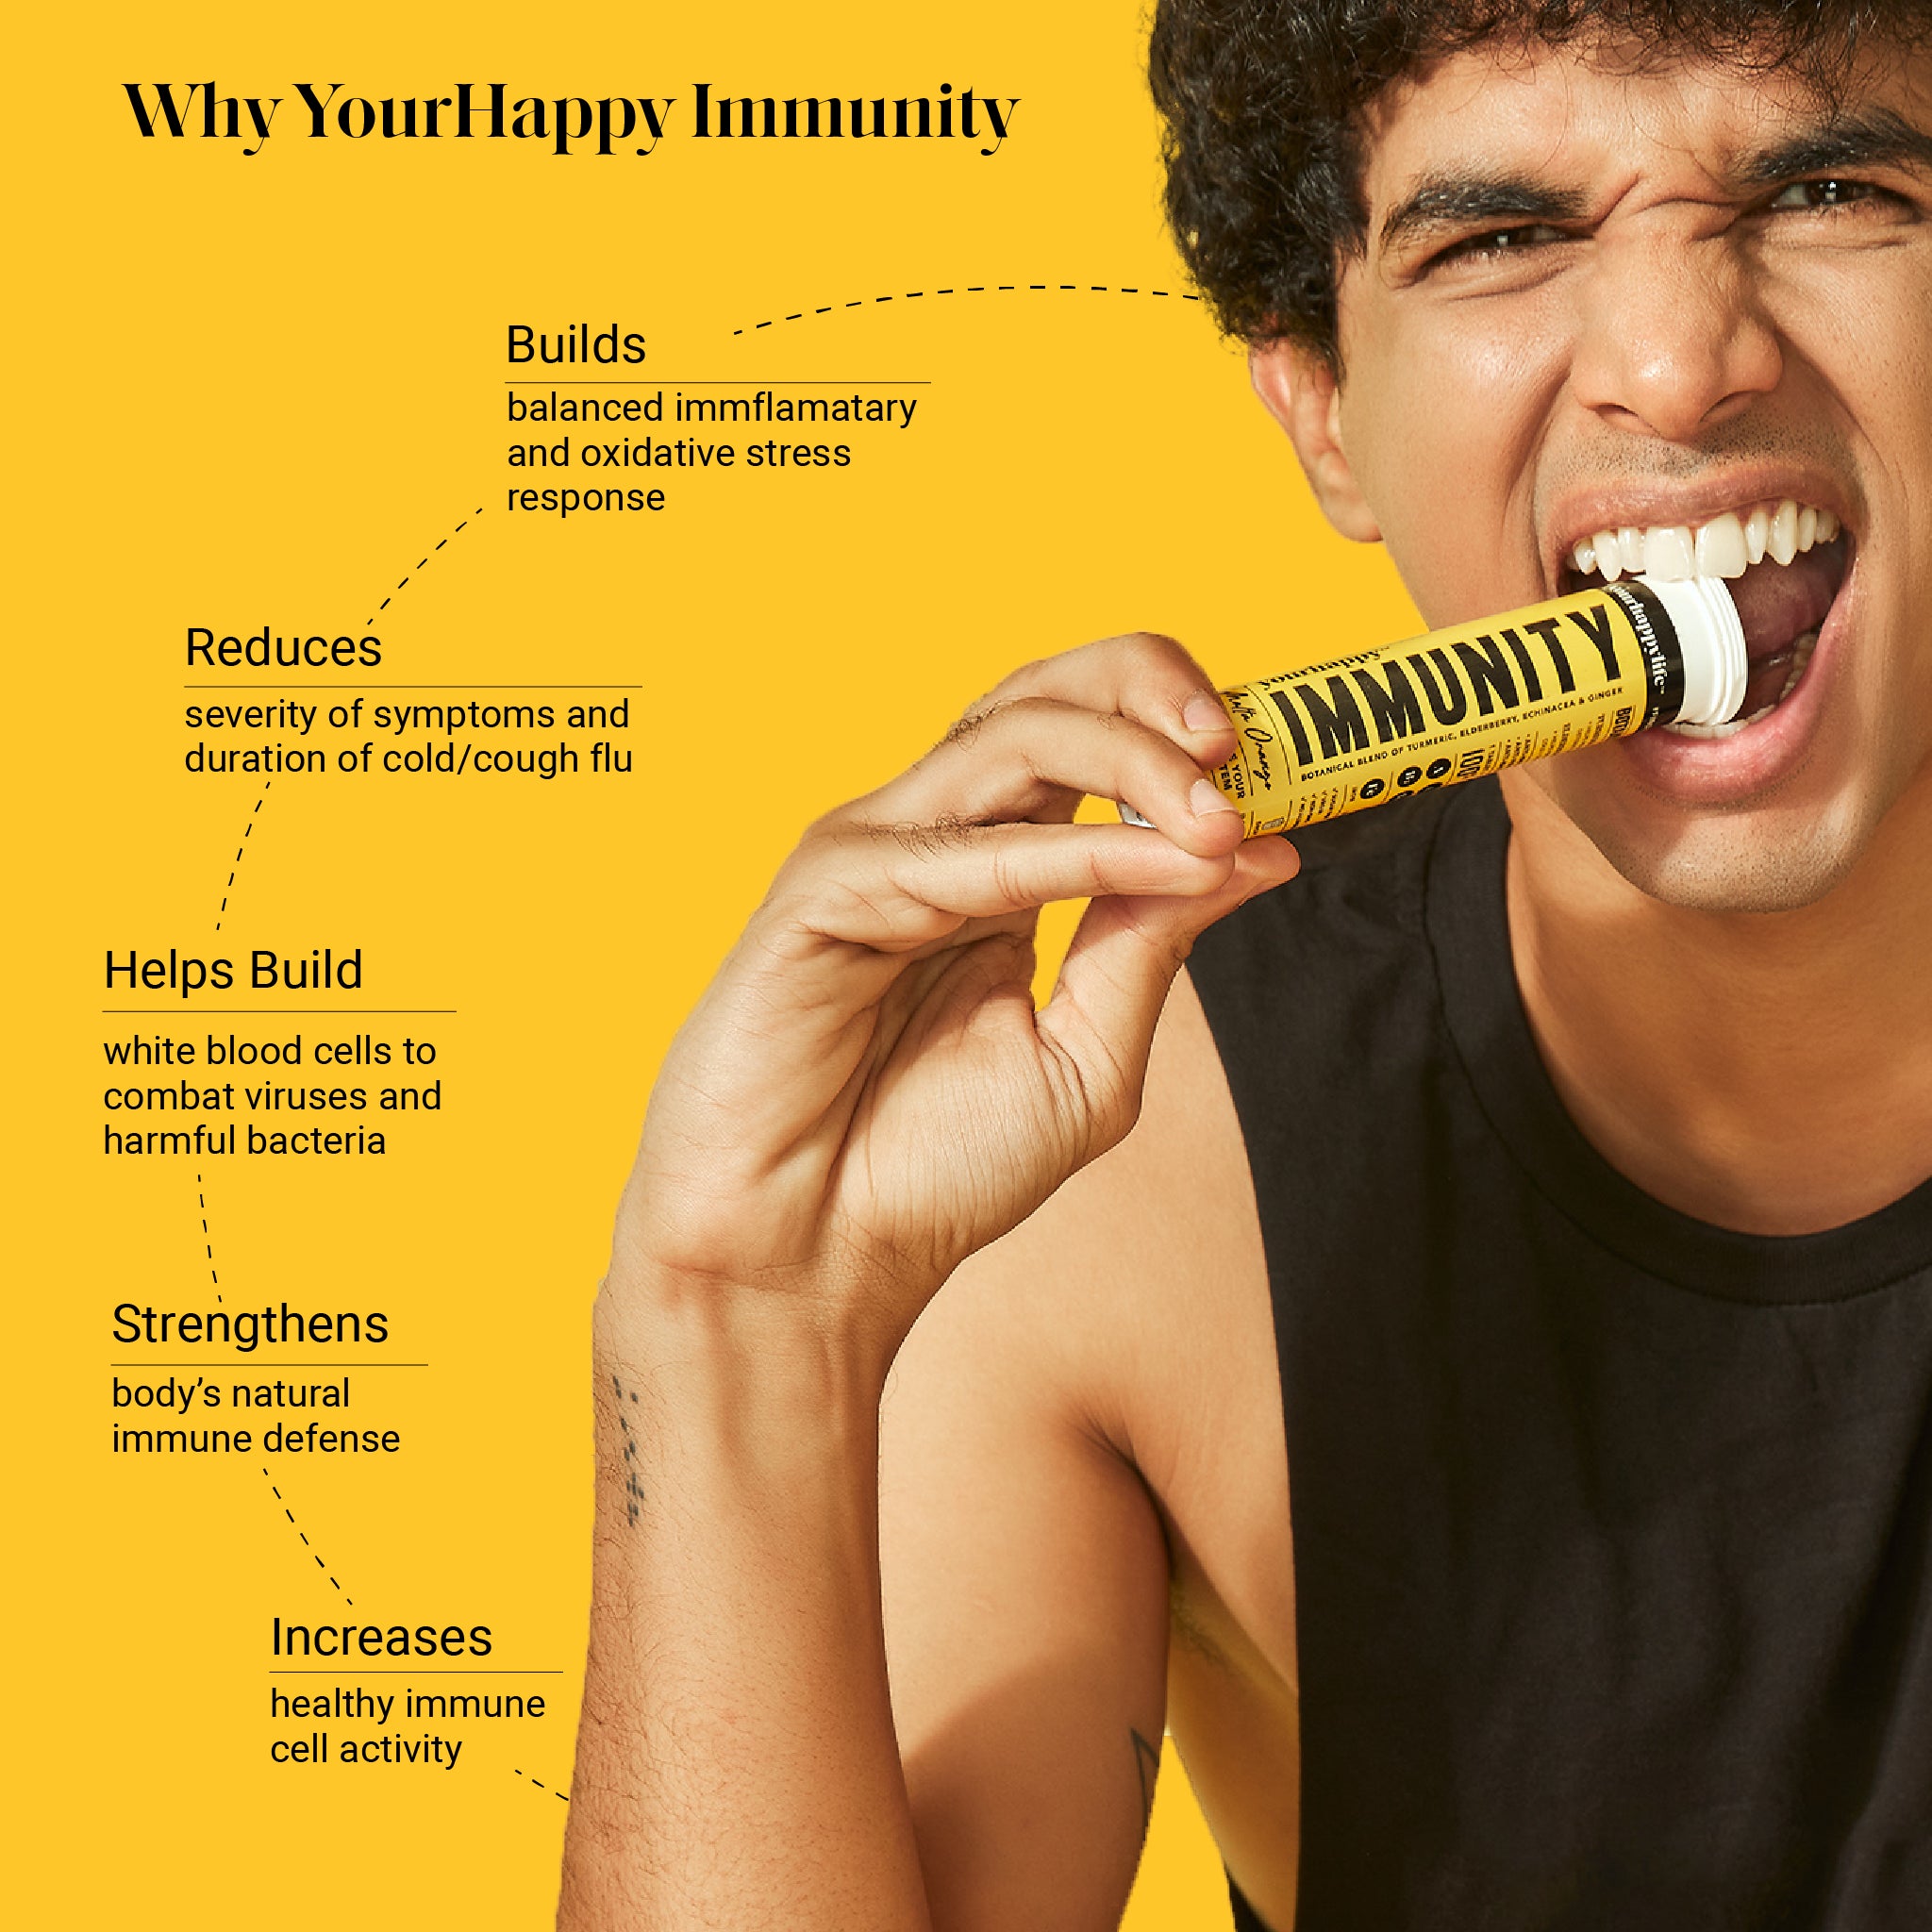 SuperCharged - Skin and Immunity